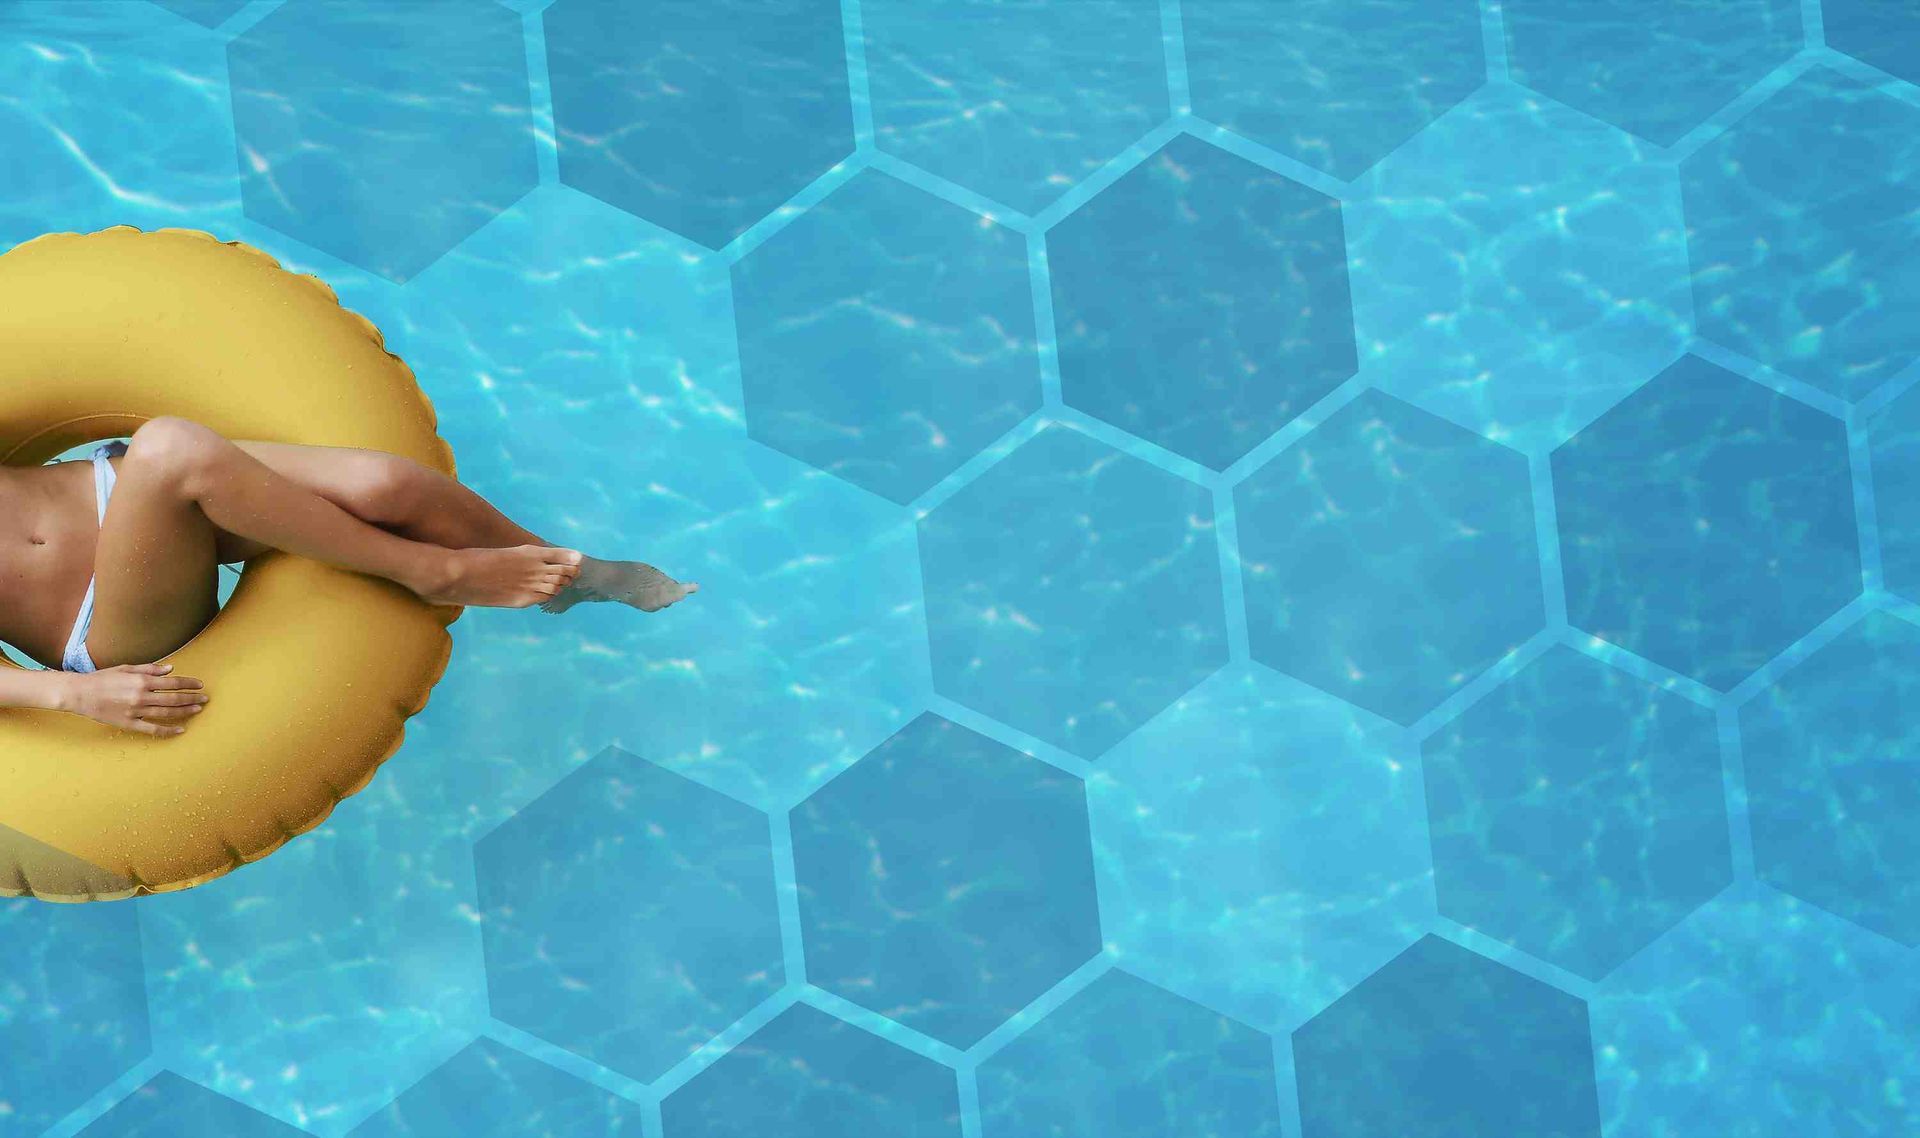 A woman floating on an doughnut in a swimming pool